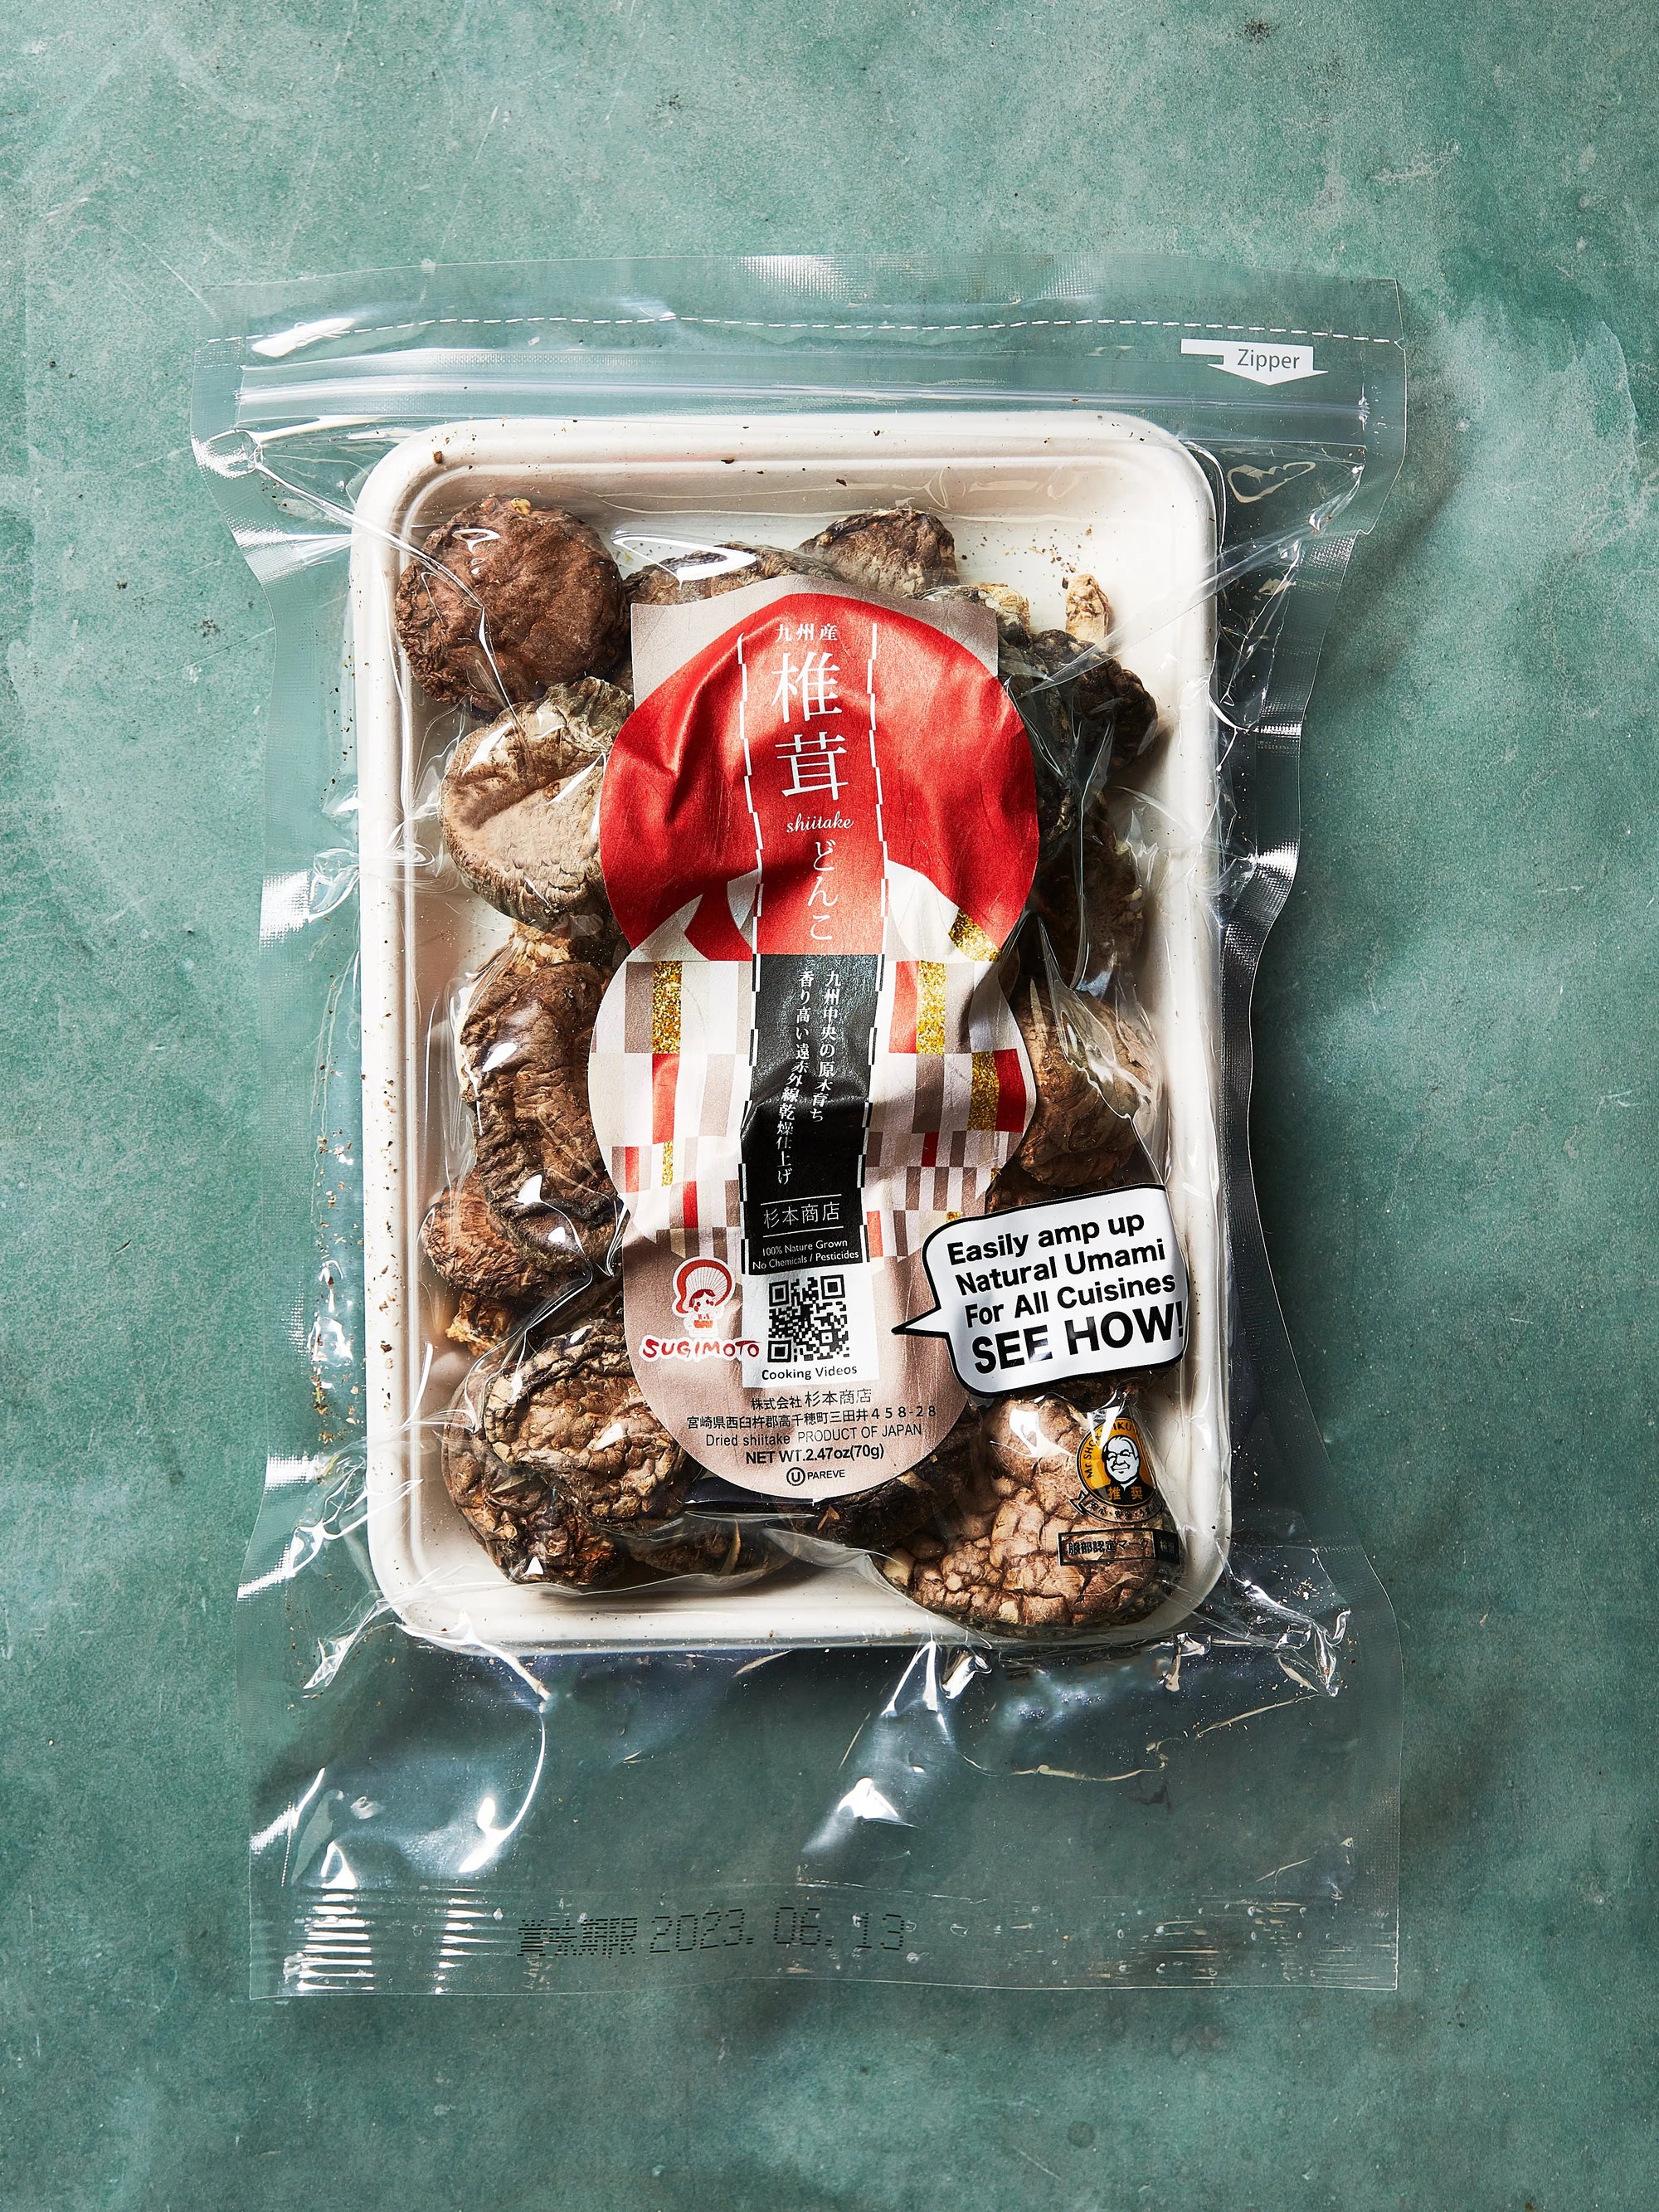 "Sugimoto Dried Shitake Mushrooms provided by Laroot World, an organic, local, gluten free New York City flexitarian, pescatarian, carnitarian, vegan, and vegetarian meal delivery service  "